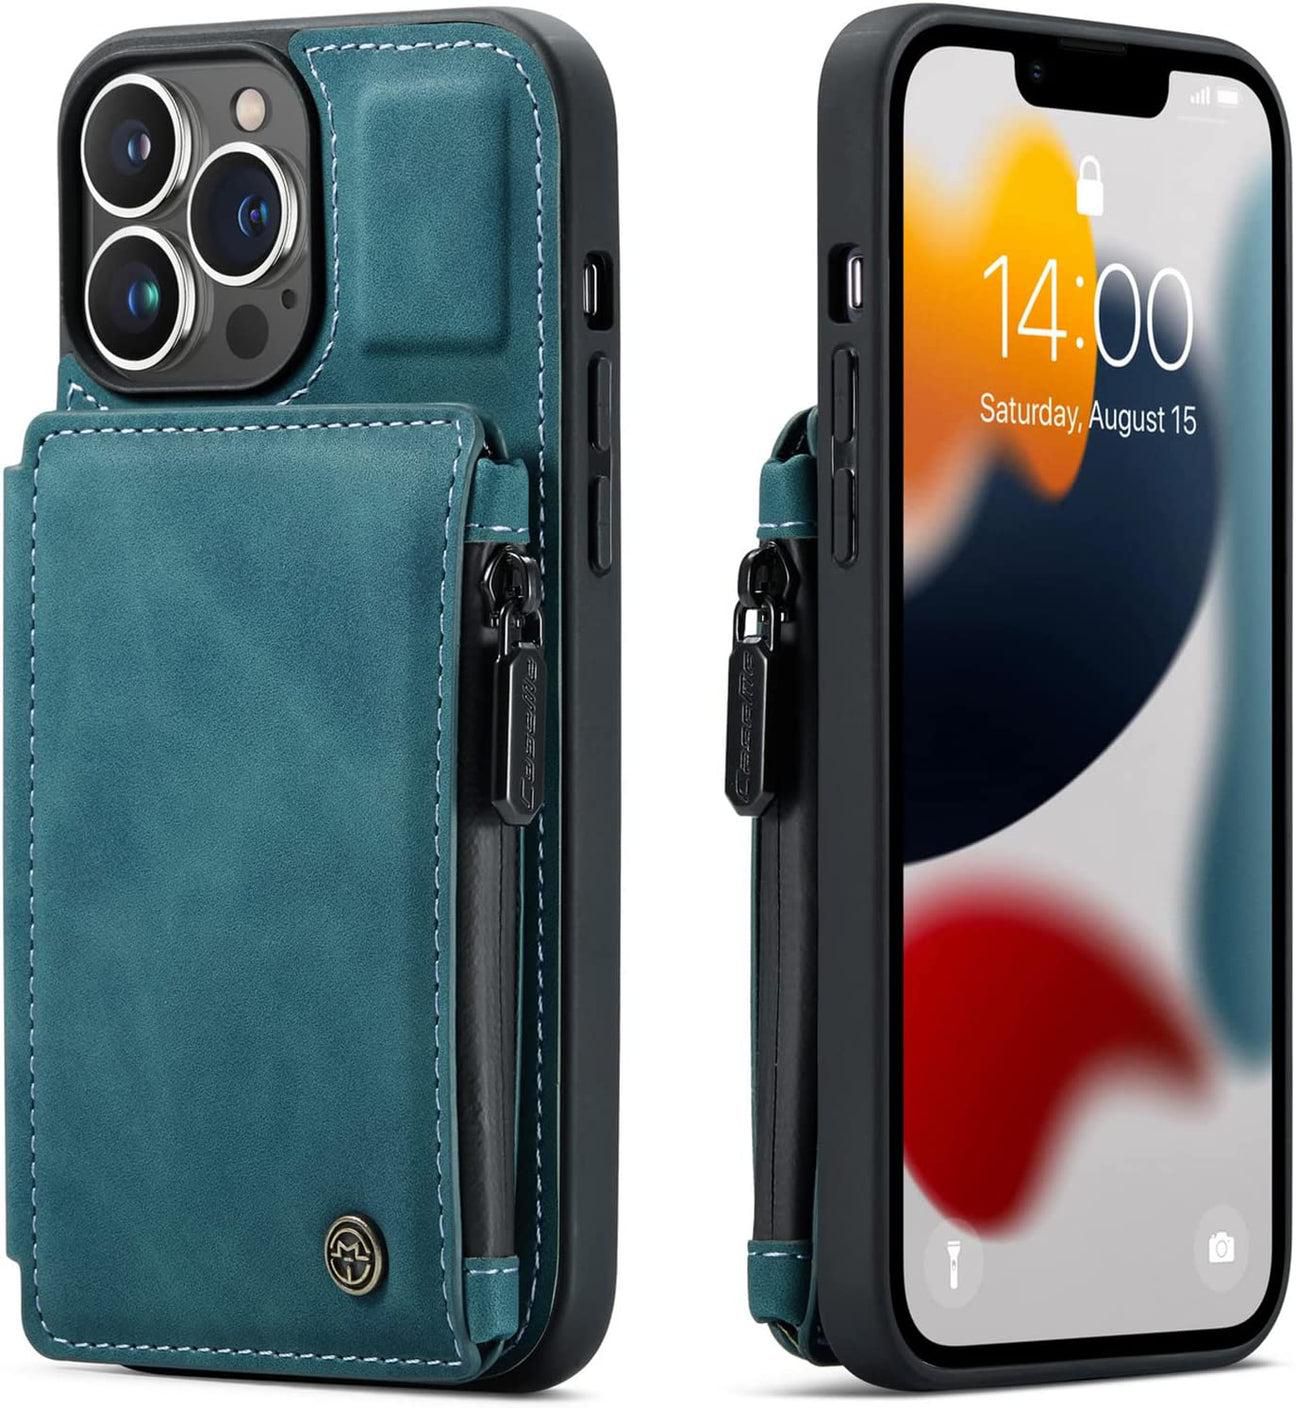 Caseme for iPhone 13 Pro Max 6.7 inch Double Magnetic Clasp Zipper Purse PU Leather Wallet Case with Credit Card Slot Holder Back Flip Cover - Blue